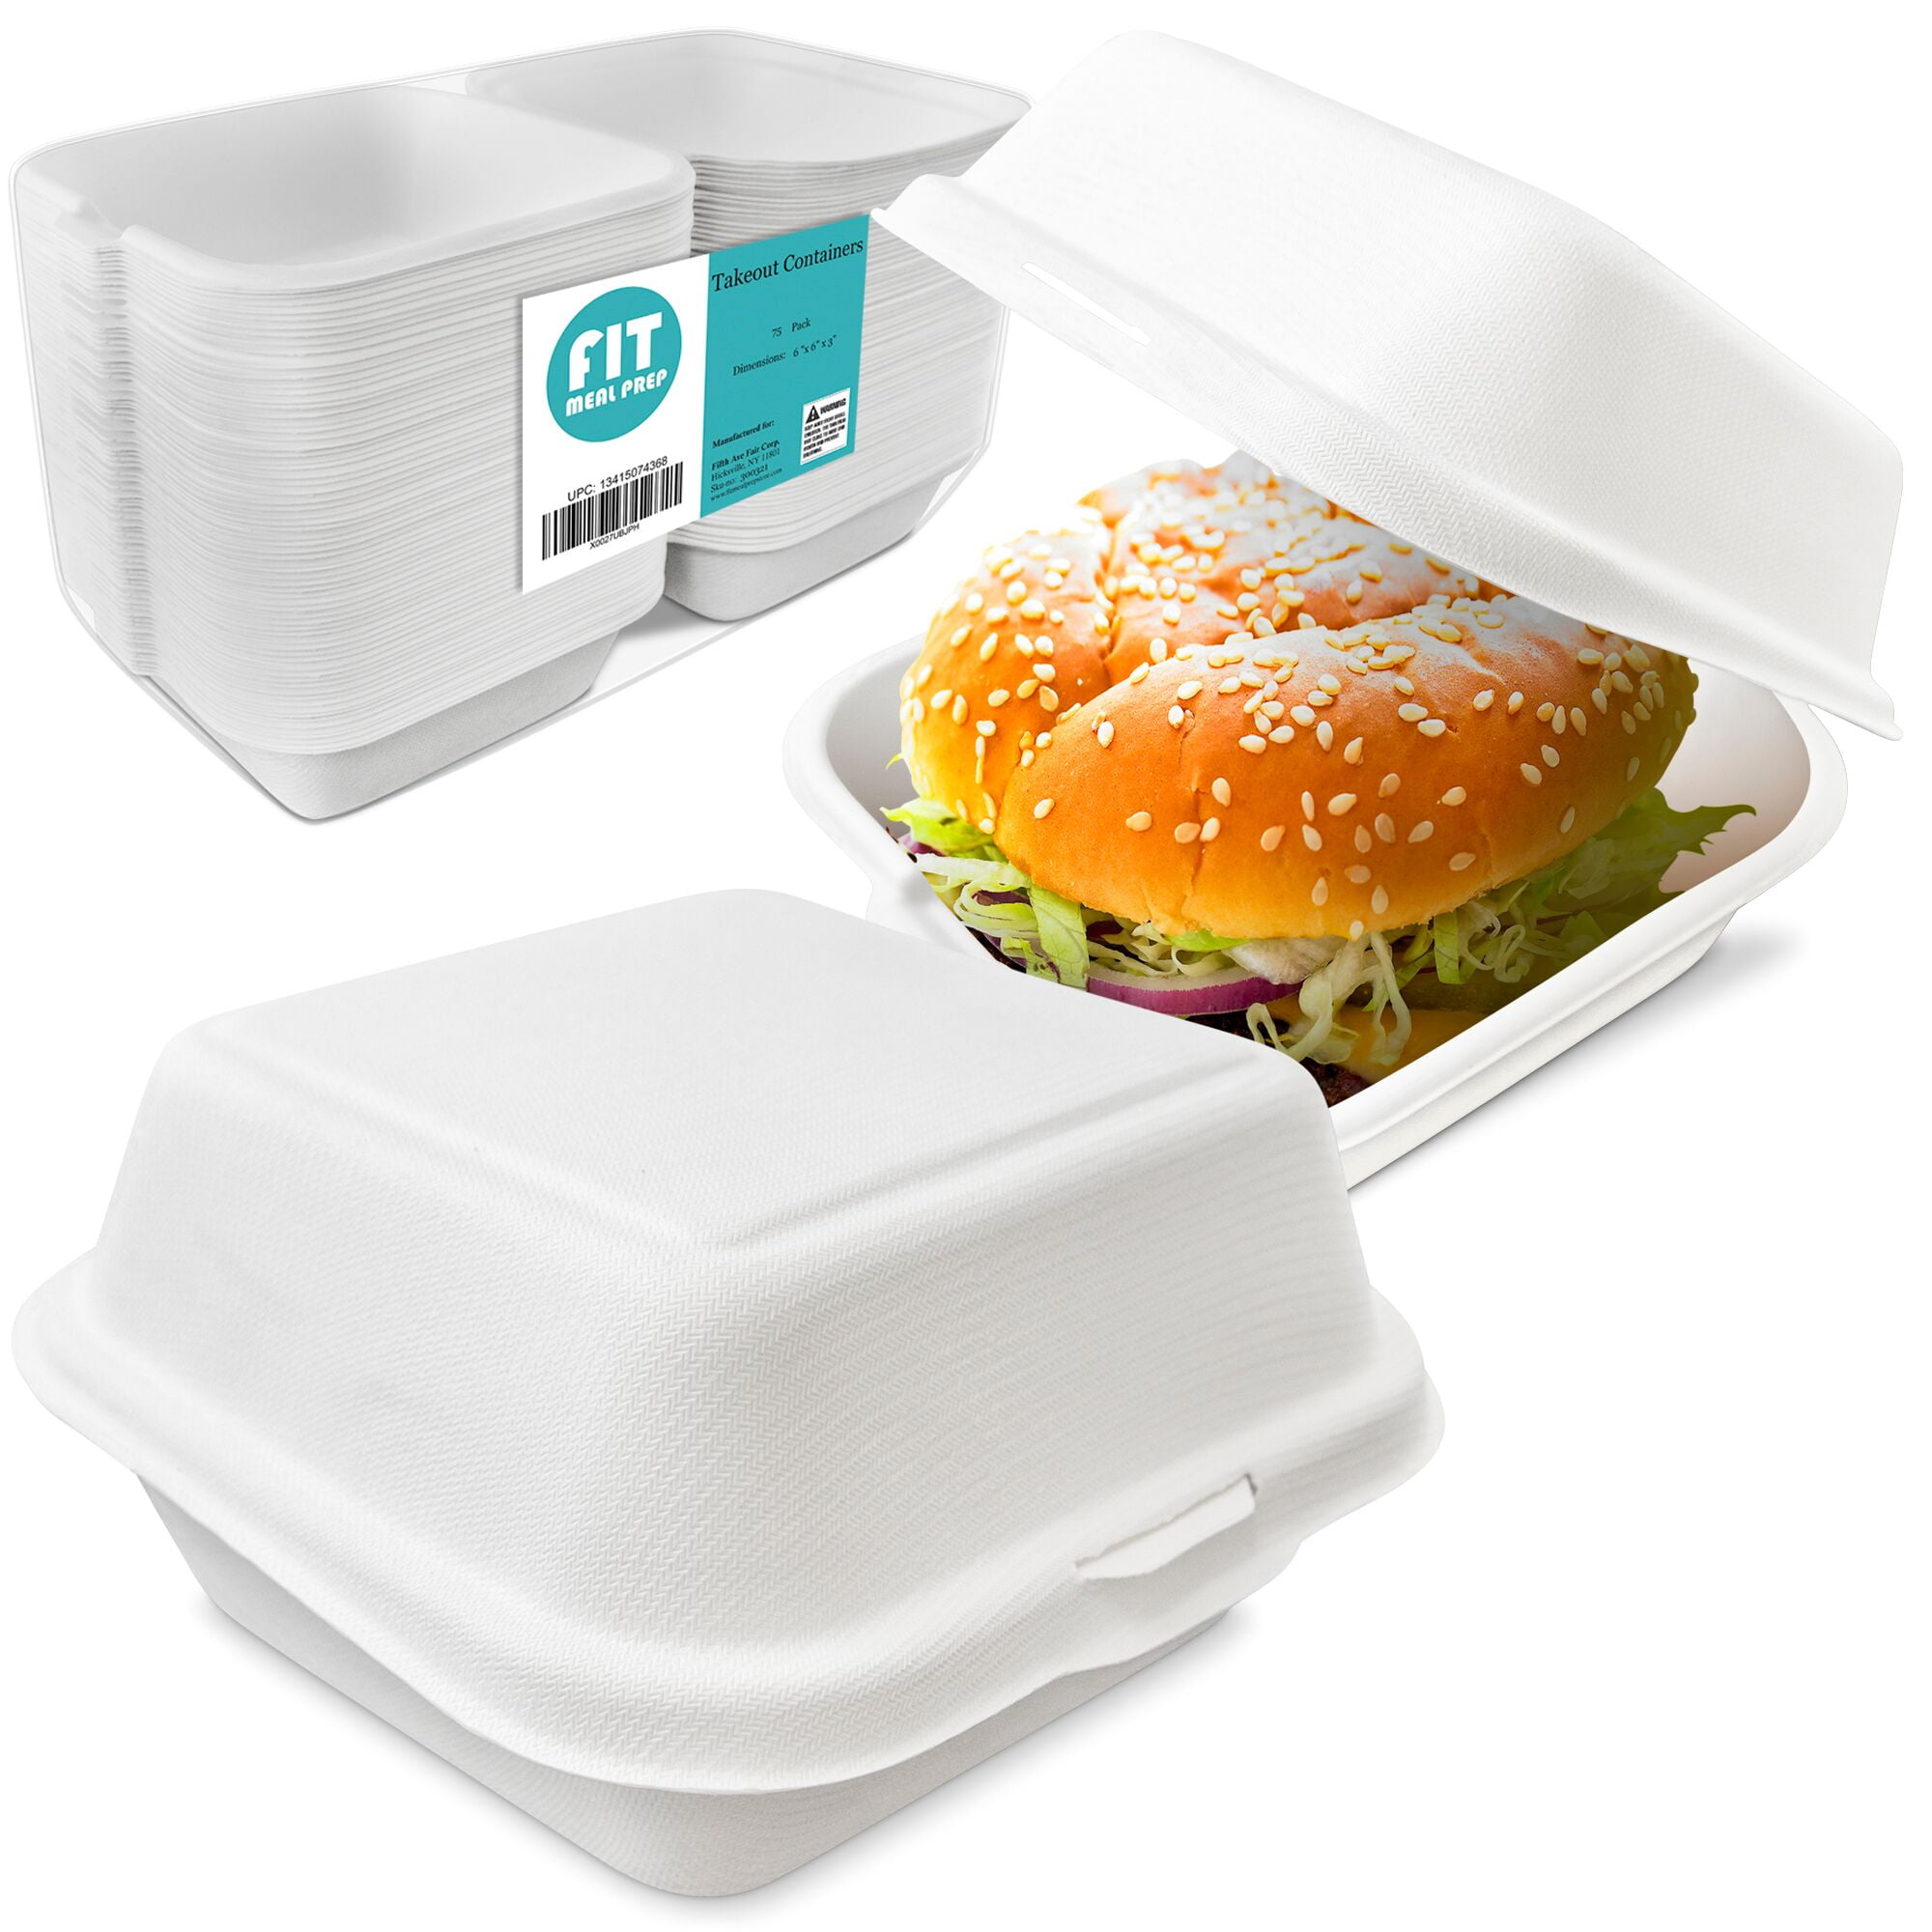 Restaurant Take Out Food 100 Earth-Choice Sandwich Takeout Containers Togo Box 